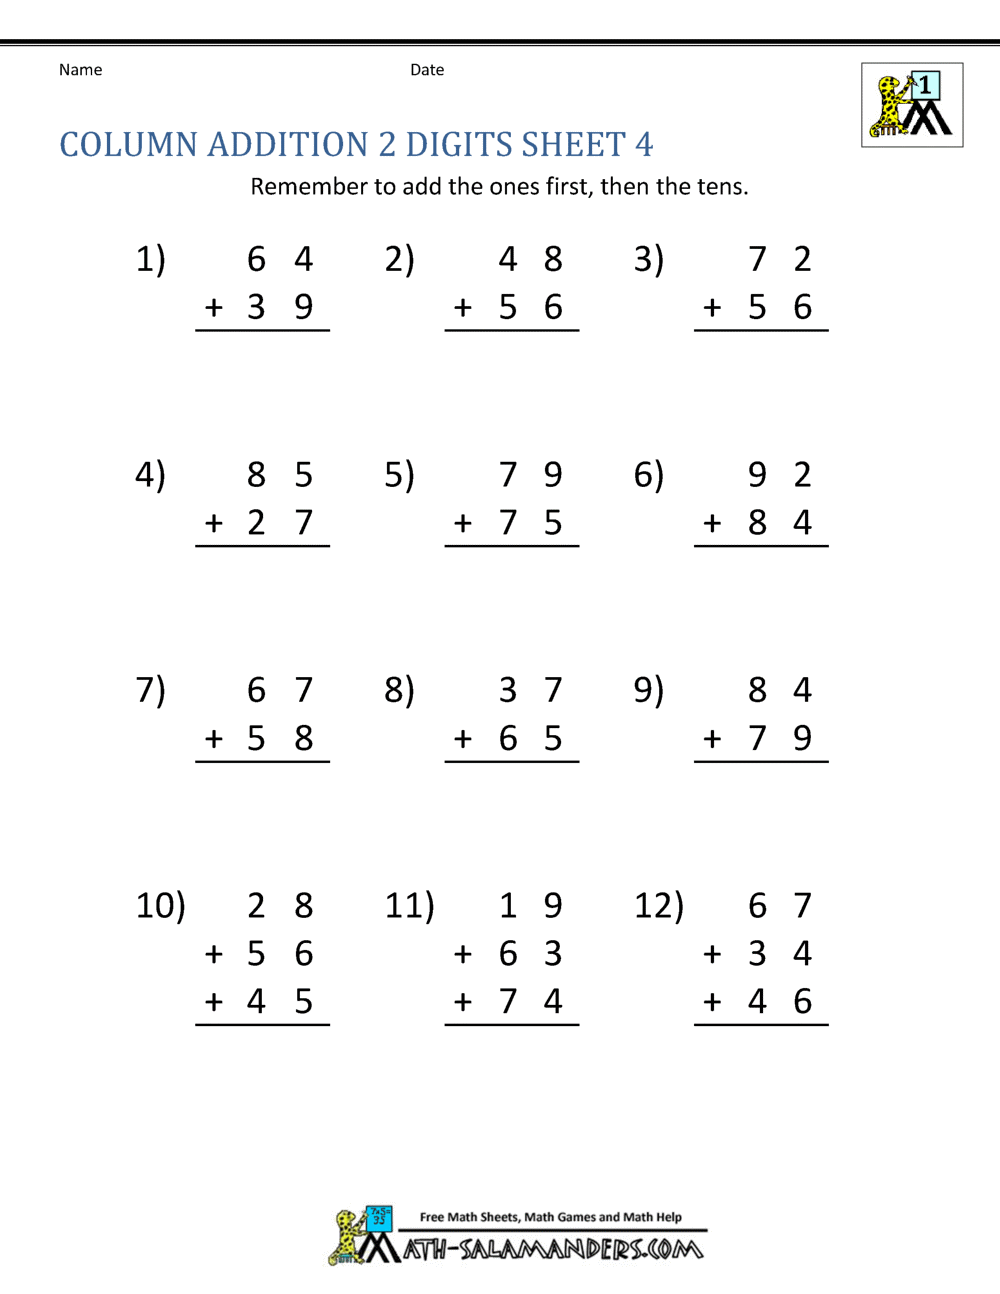 30 Example Free Math Worksheets 29